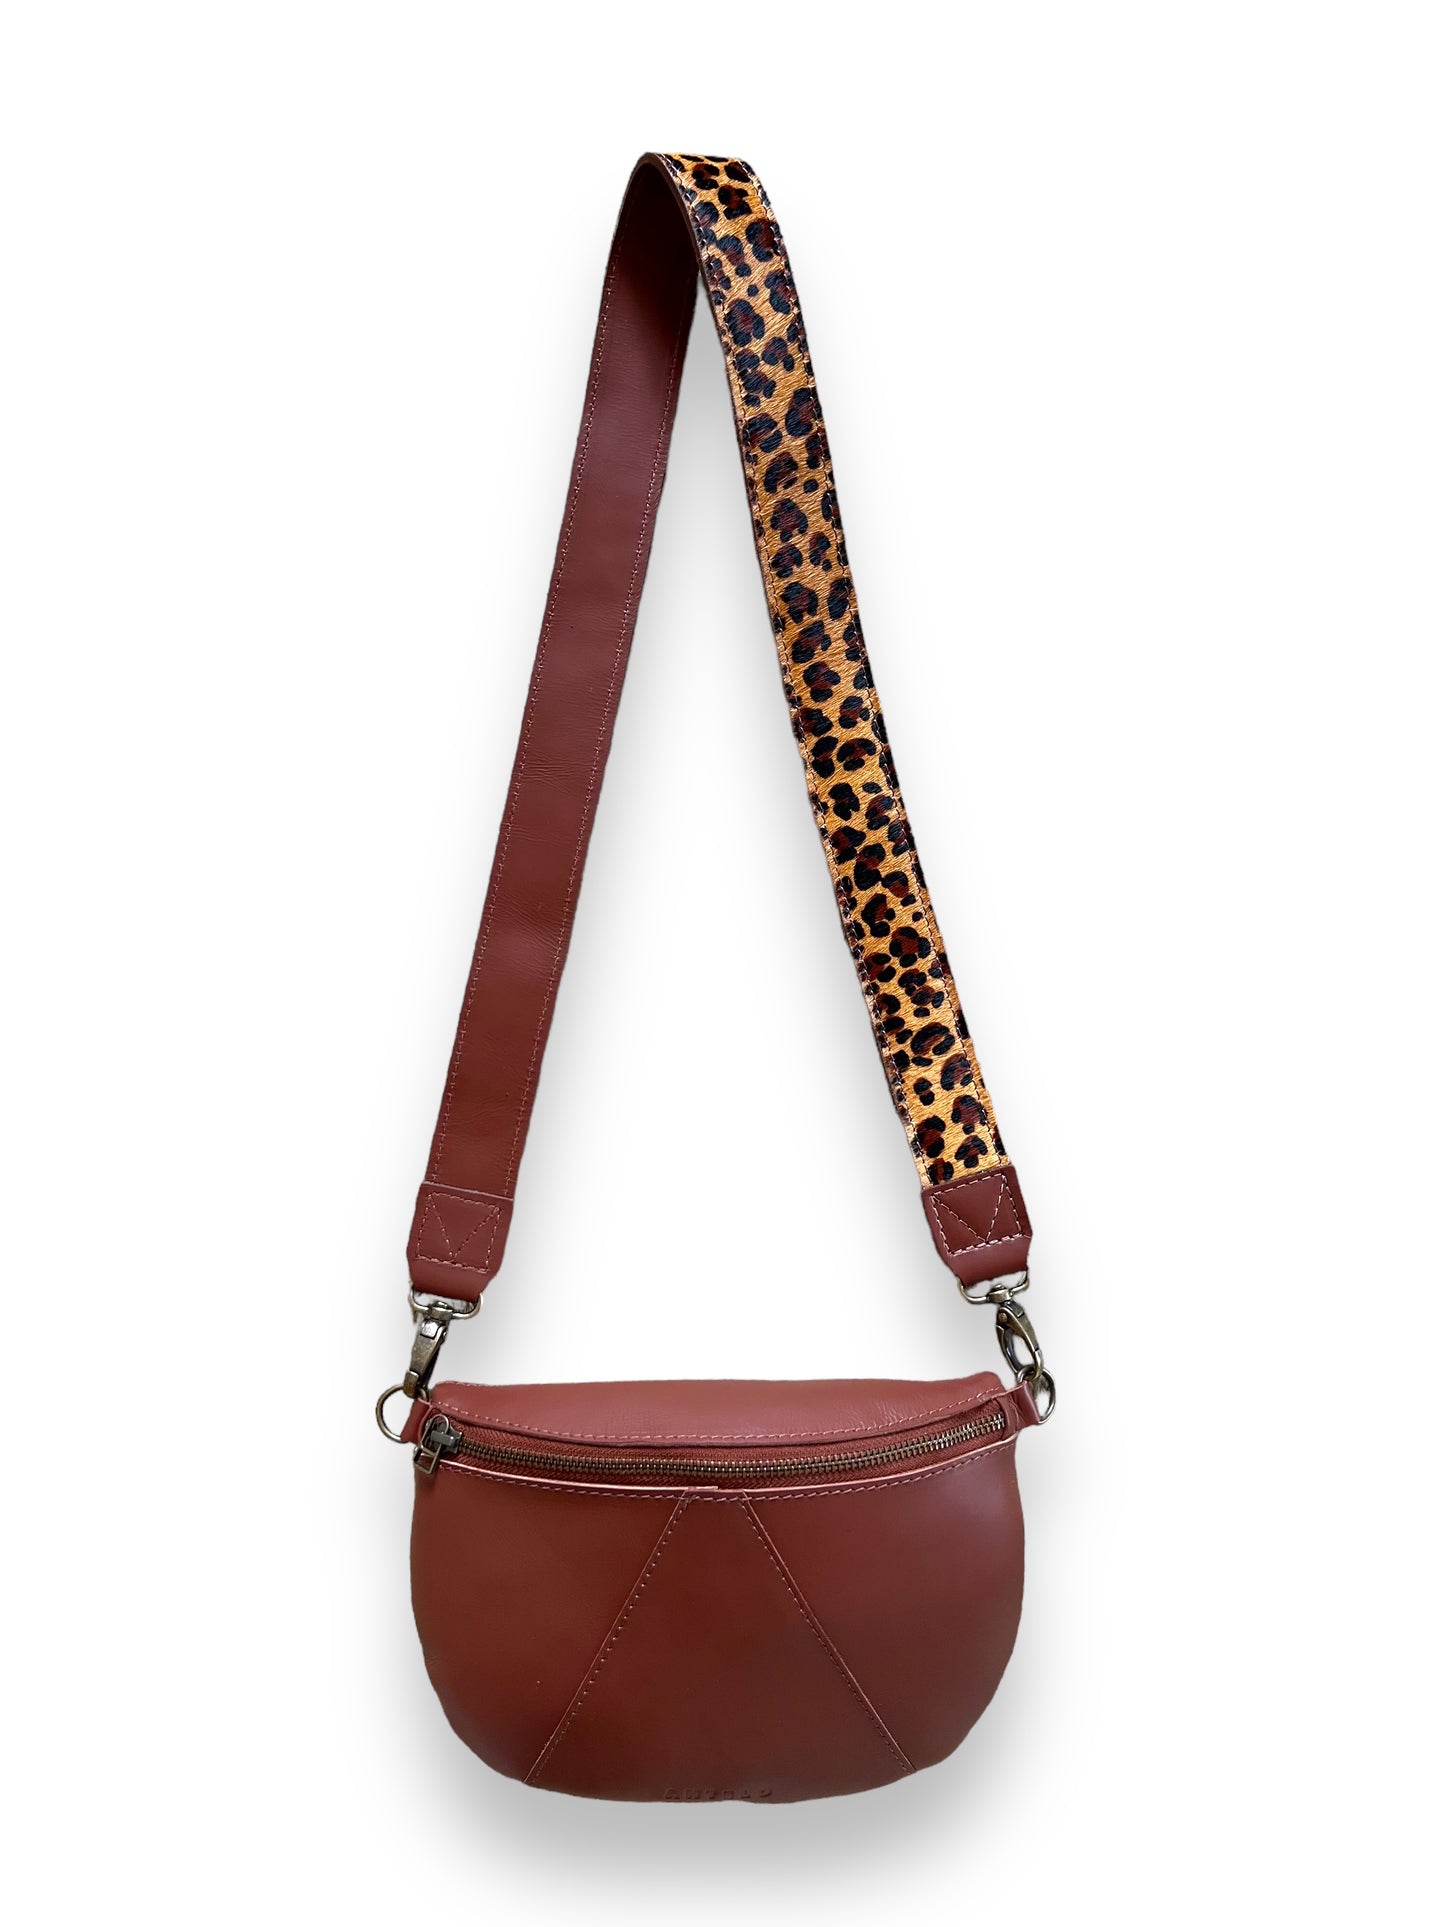 Ruby Eclipse leather crossbody with Wild leather strap